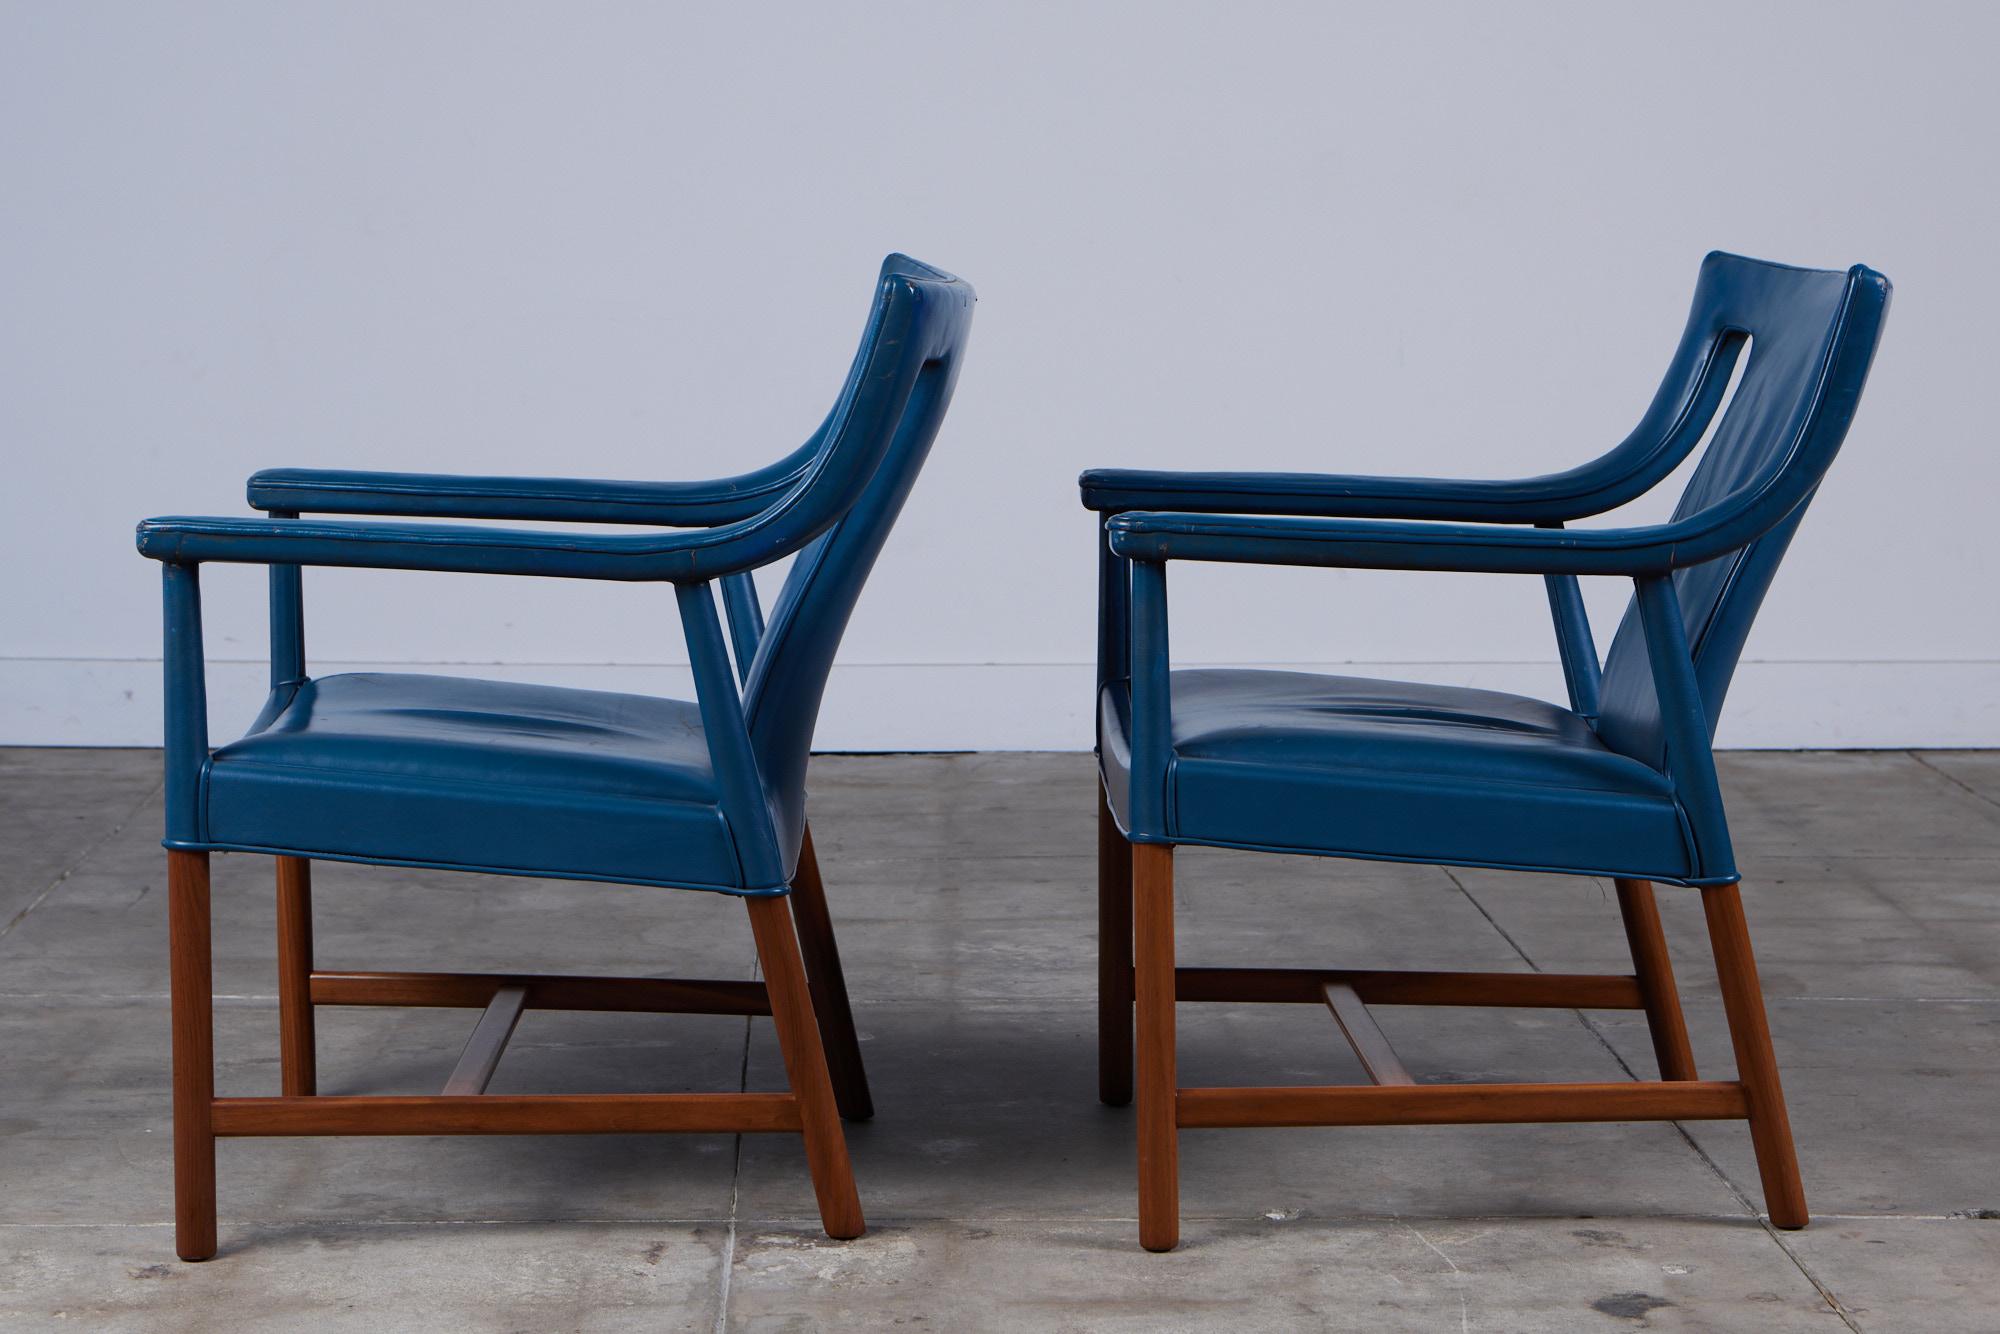 Mid-20th Century Pair of Blue Leather Lounge Chairs by Ejner Larsen & Aksel Bender Madsen